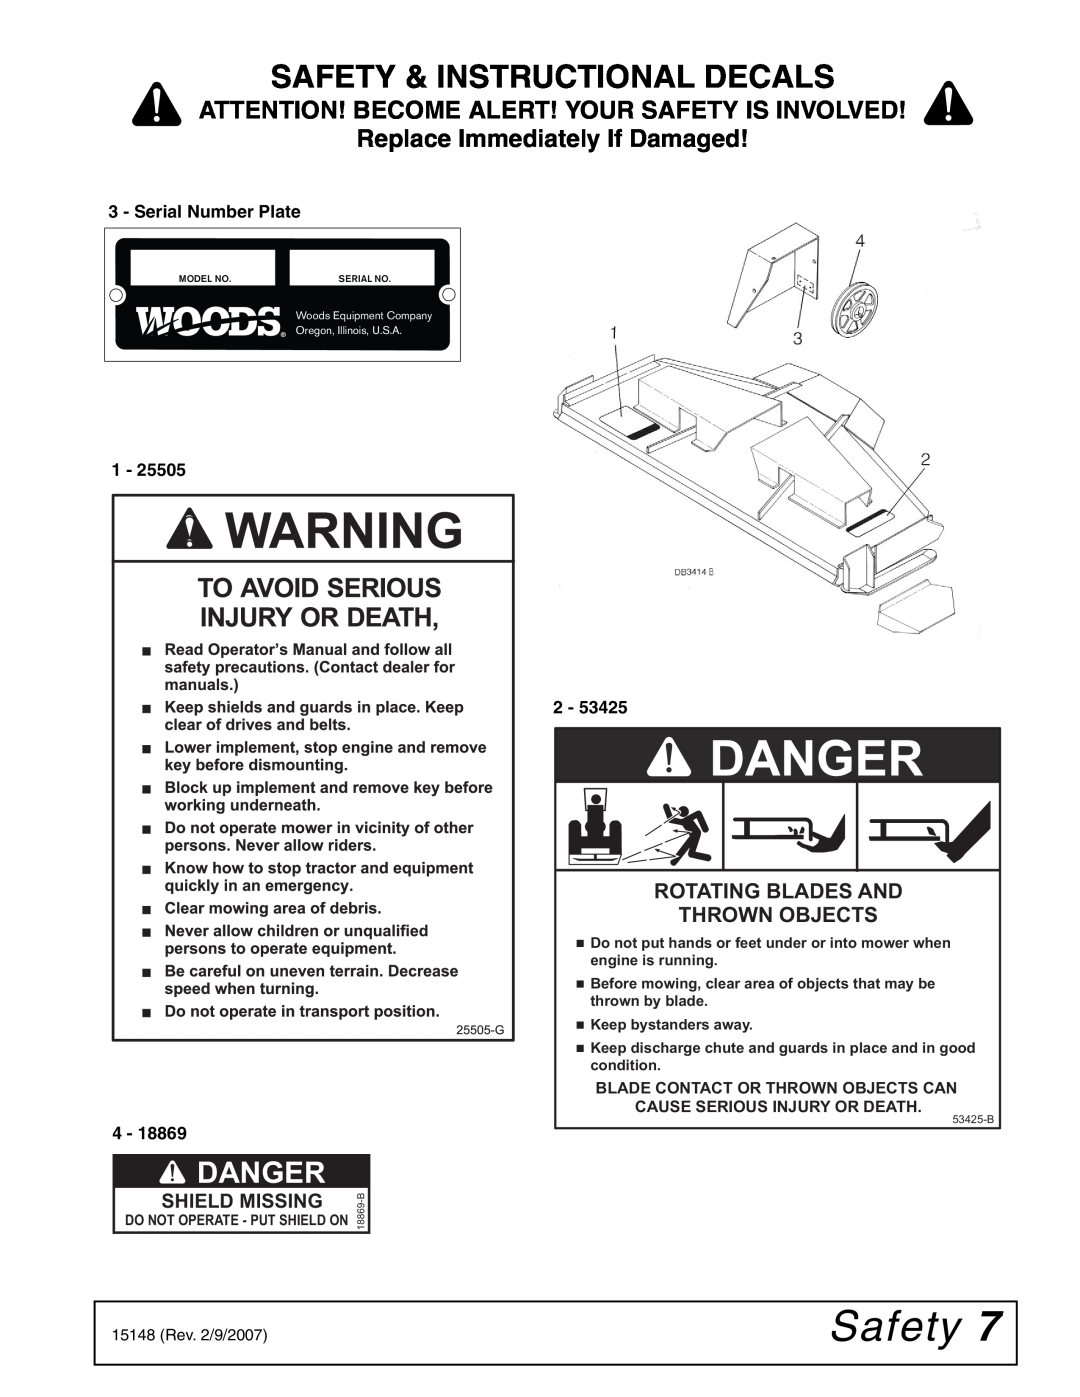 Woods Equipment L306A-3, L59A-3 Safety & Instructional Decals, Replace Immediately If Damaged, Danger, Rotating Blades And 